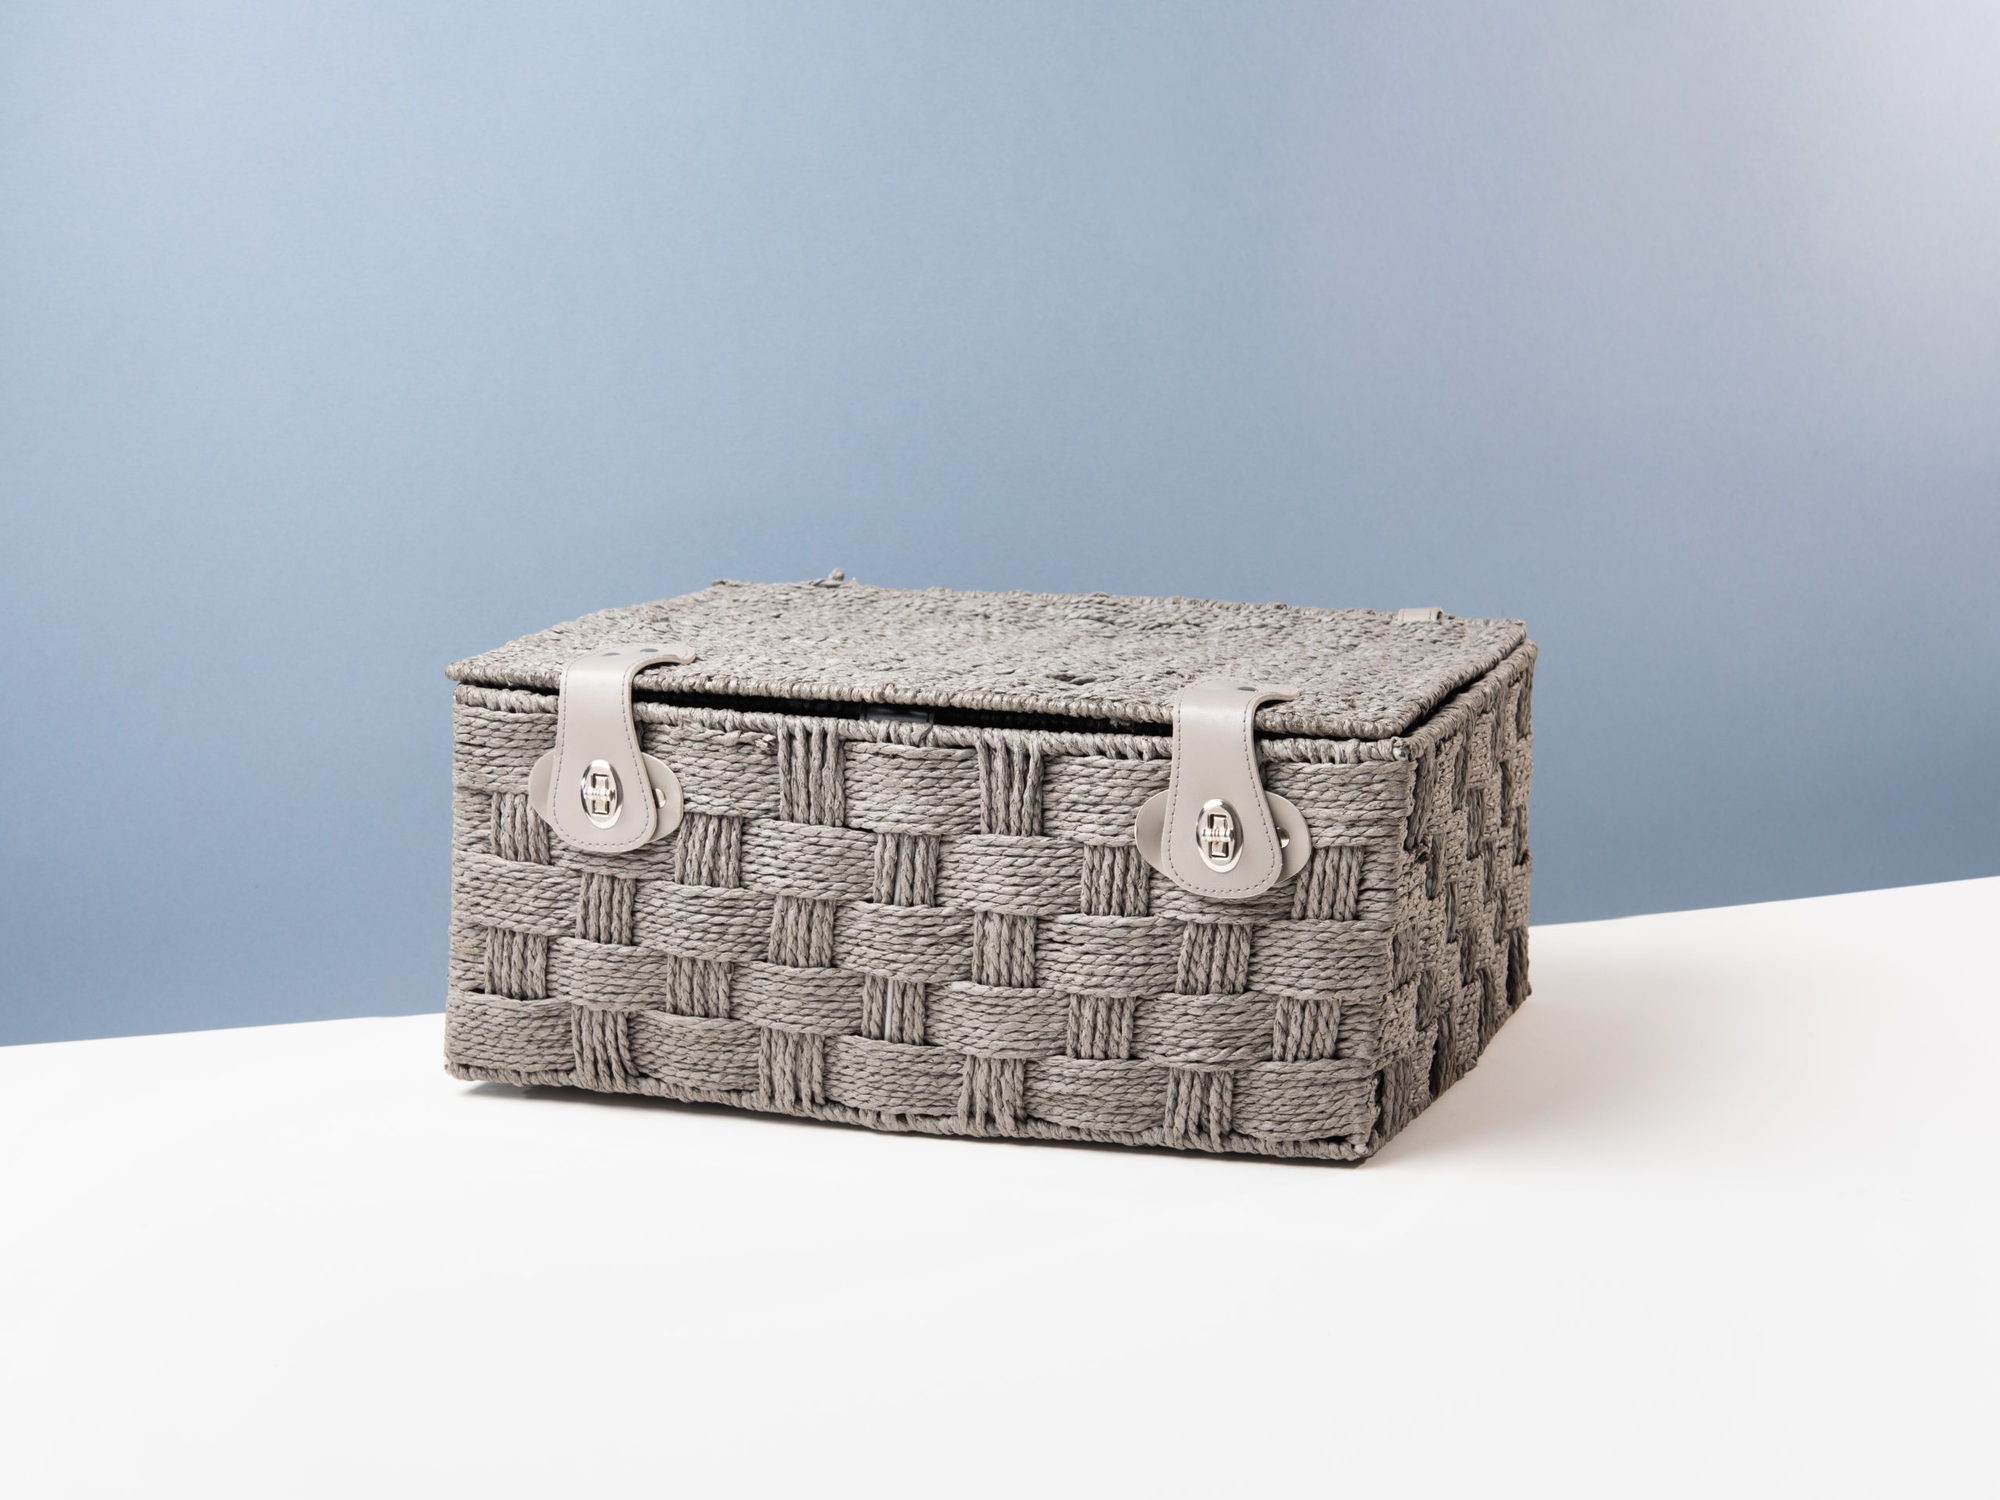 The Thinking of You Morale Booster Gift Box - Grey Rope Basket